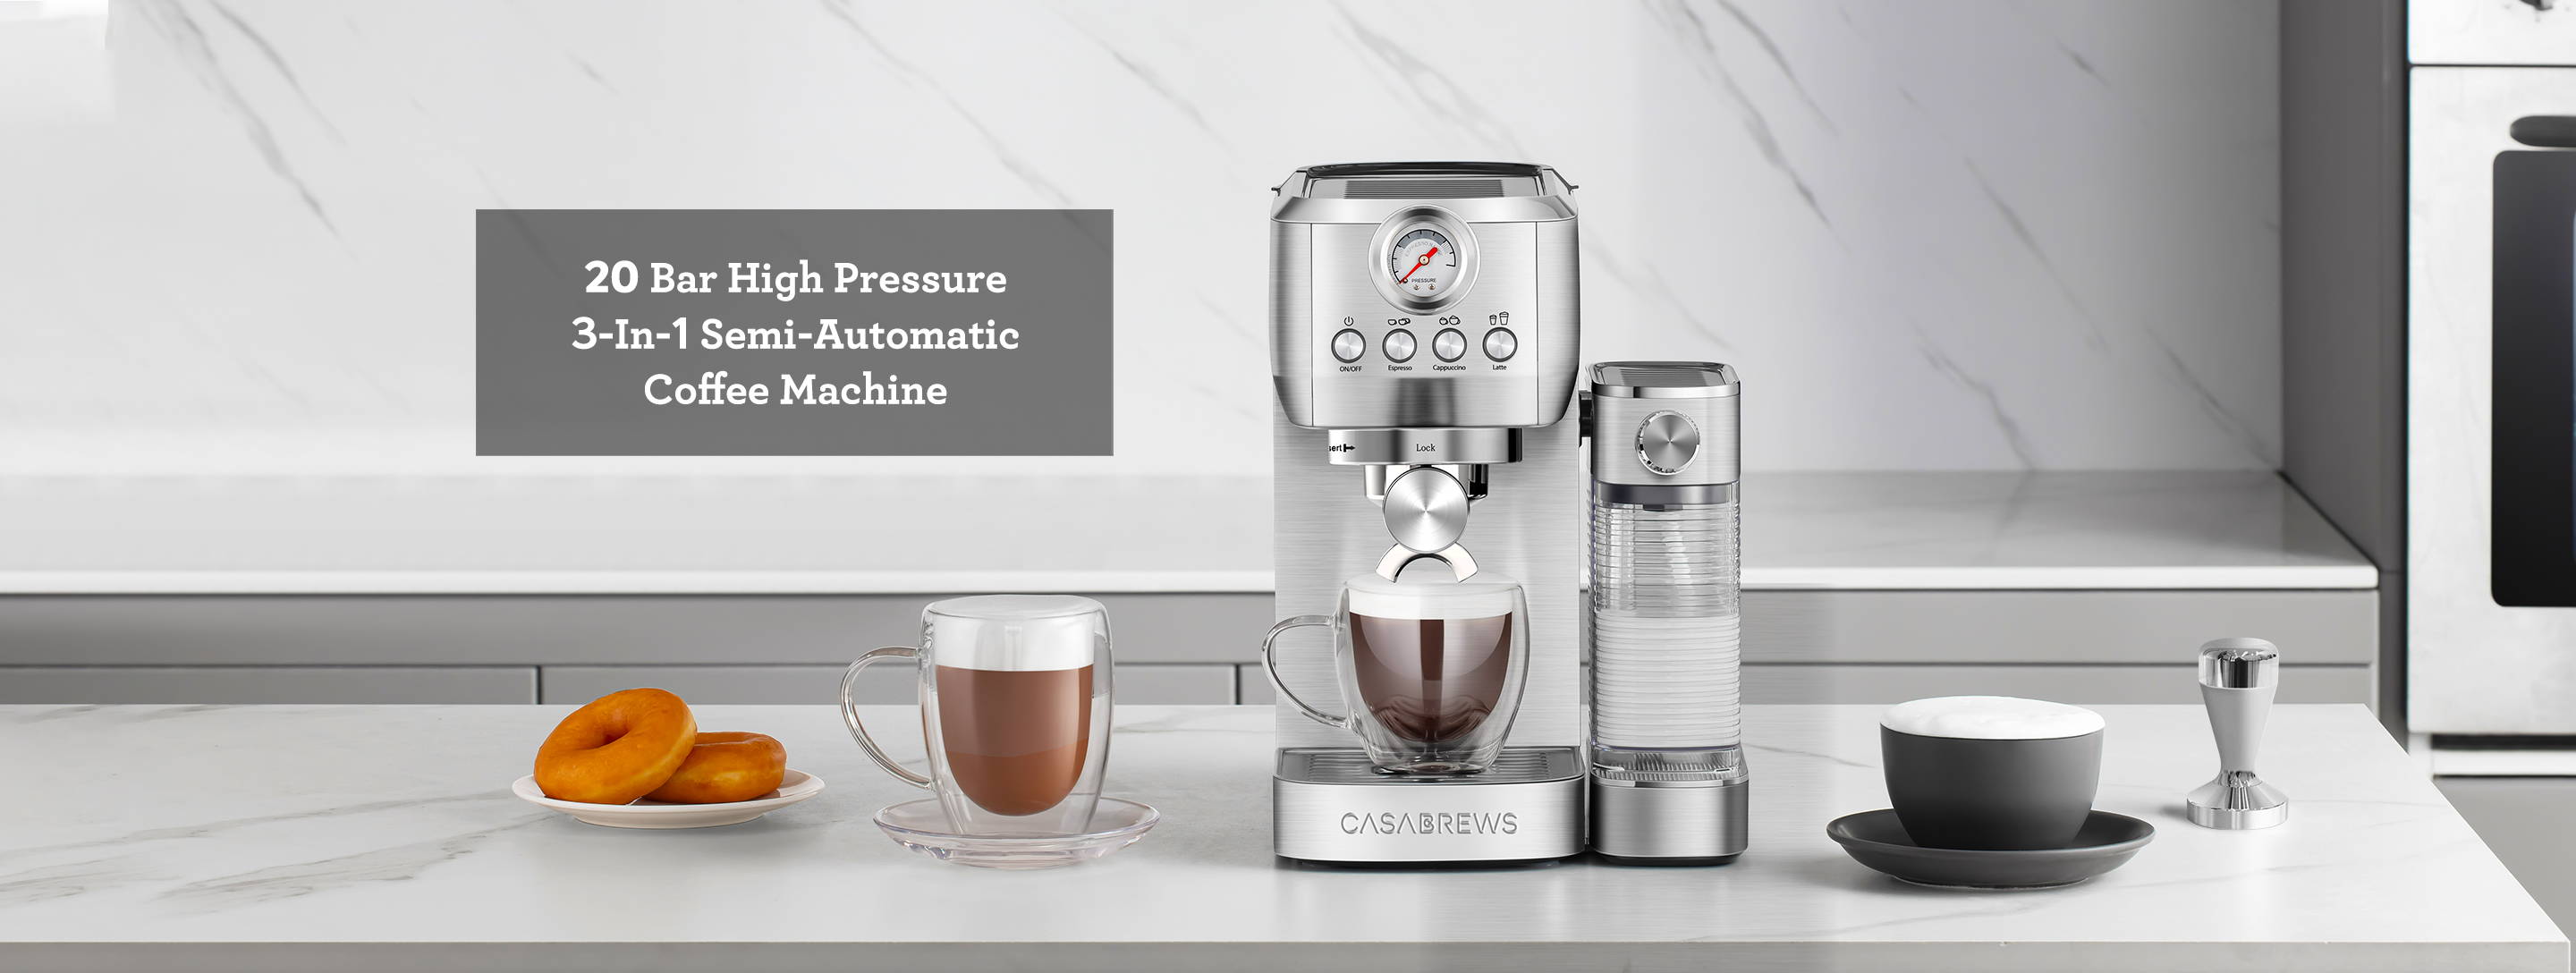 Casabrews 20 bar high pressure 3-in-1 semi-automatic coffee machine 3700 pro one touch to get a cup of barista-made coffee, an easier way to enjoy espresso, latte or cappuccino.